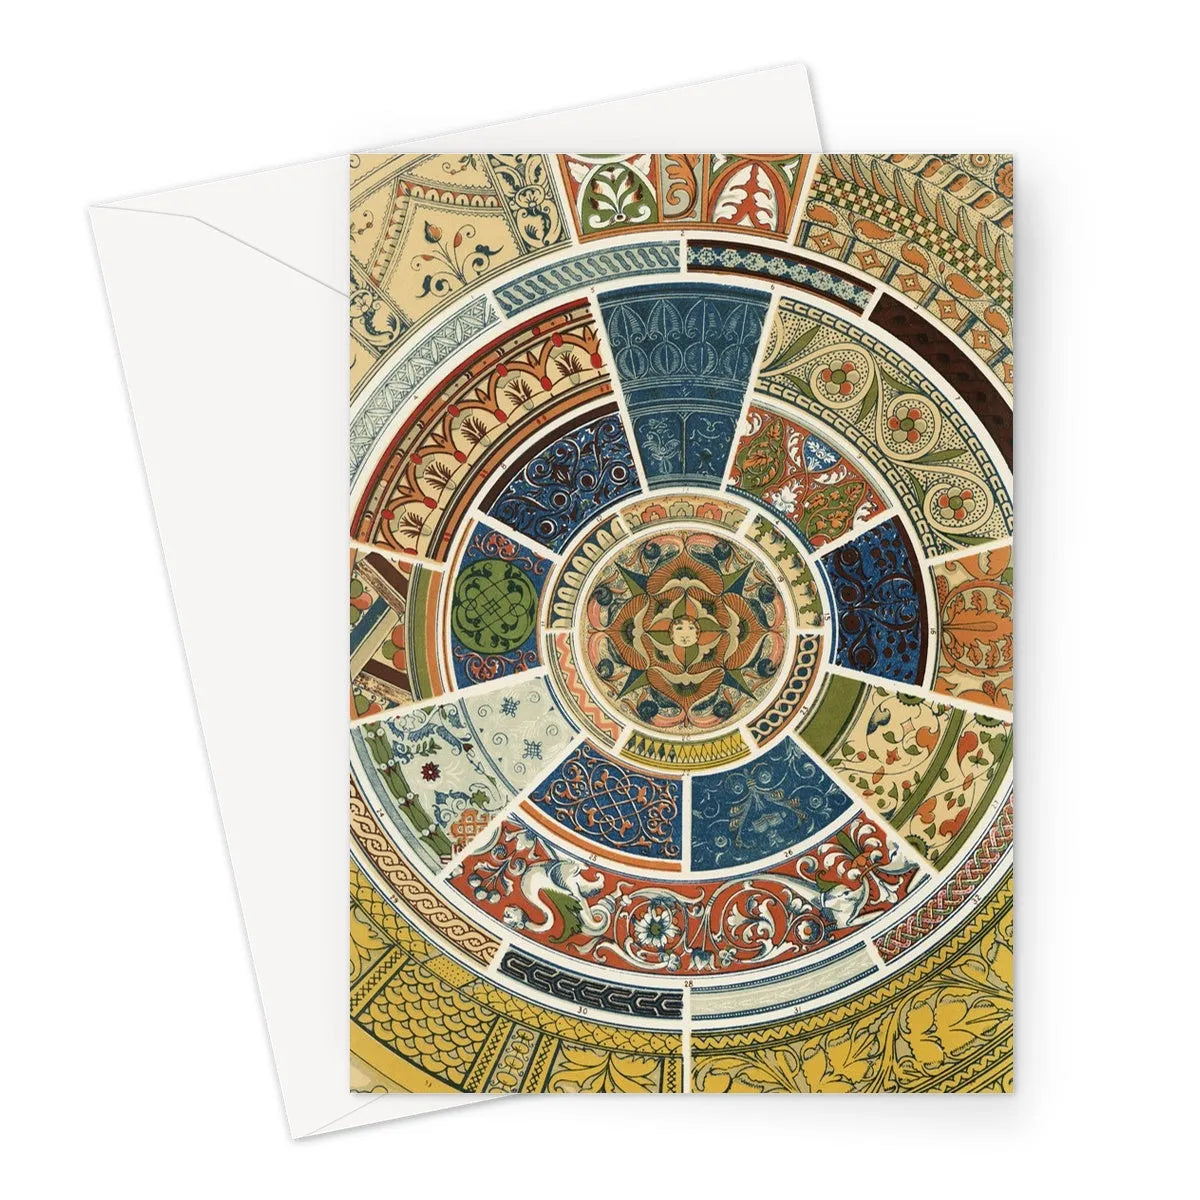 Another Grammar Of Ornament Pattern By Owen Jones Greeting Card - A5 Portrait / 1 Card - Greeting & Note Cards